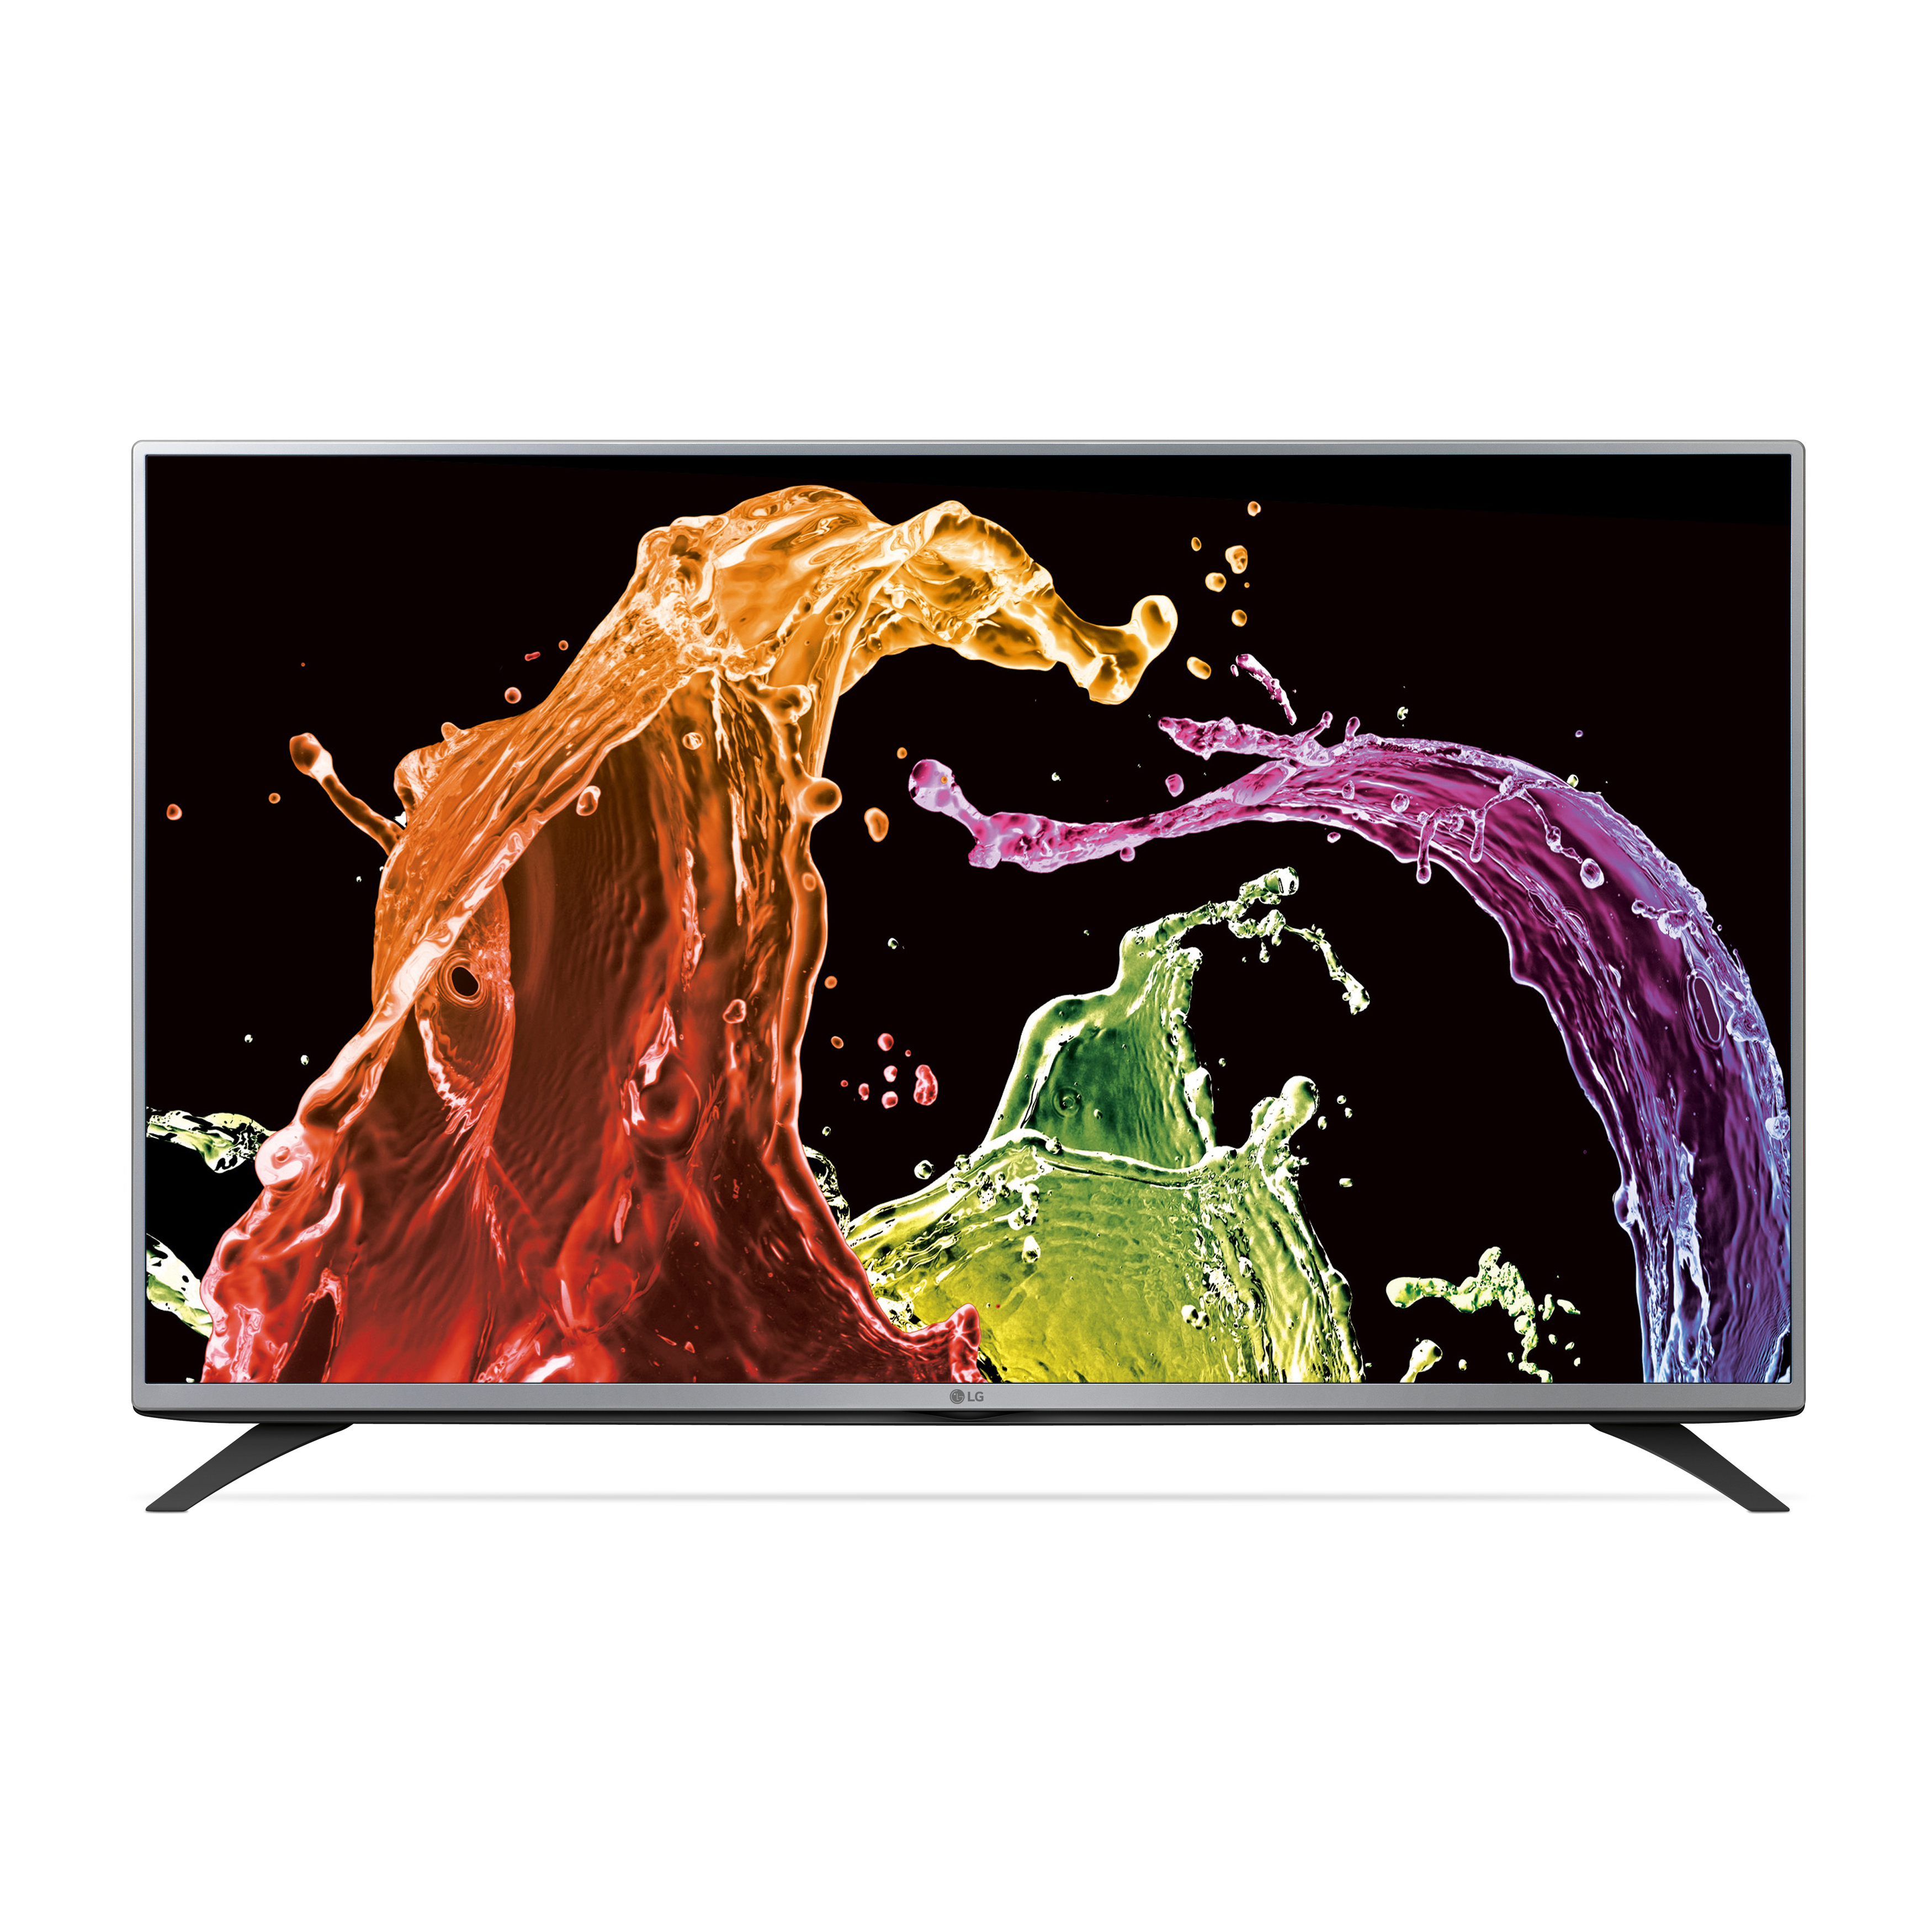 LG NEW1080P 49 In. LED TV-49LF5400